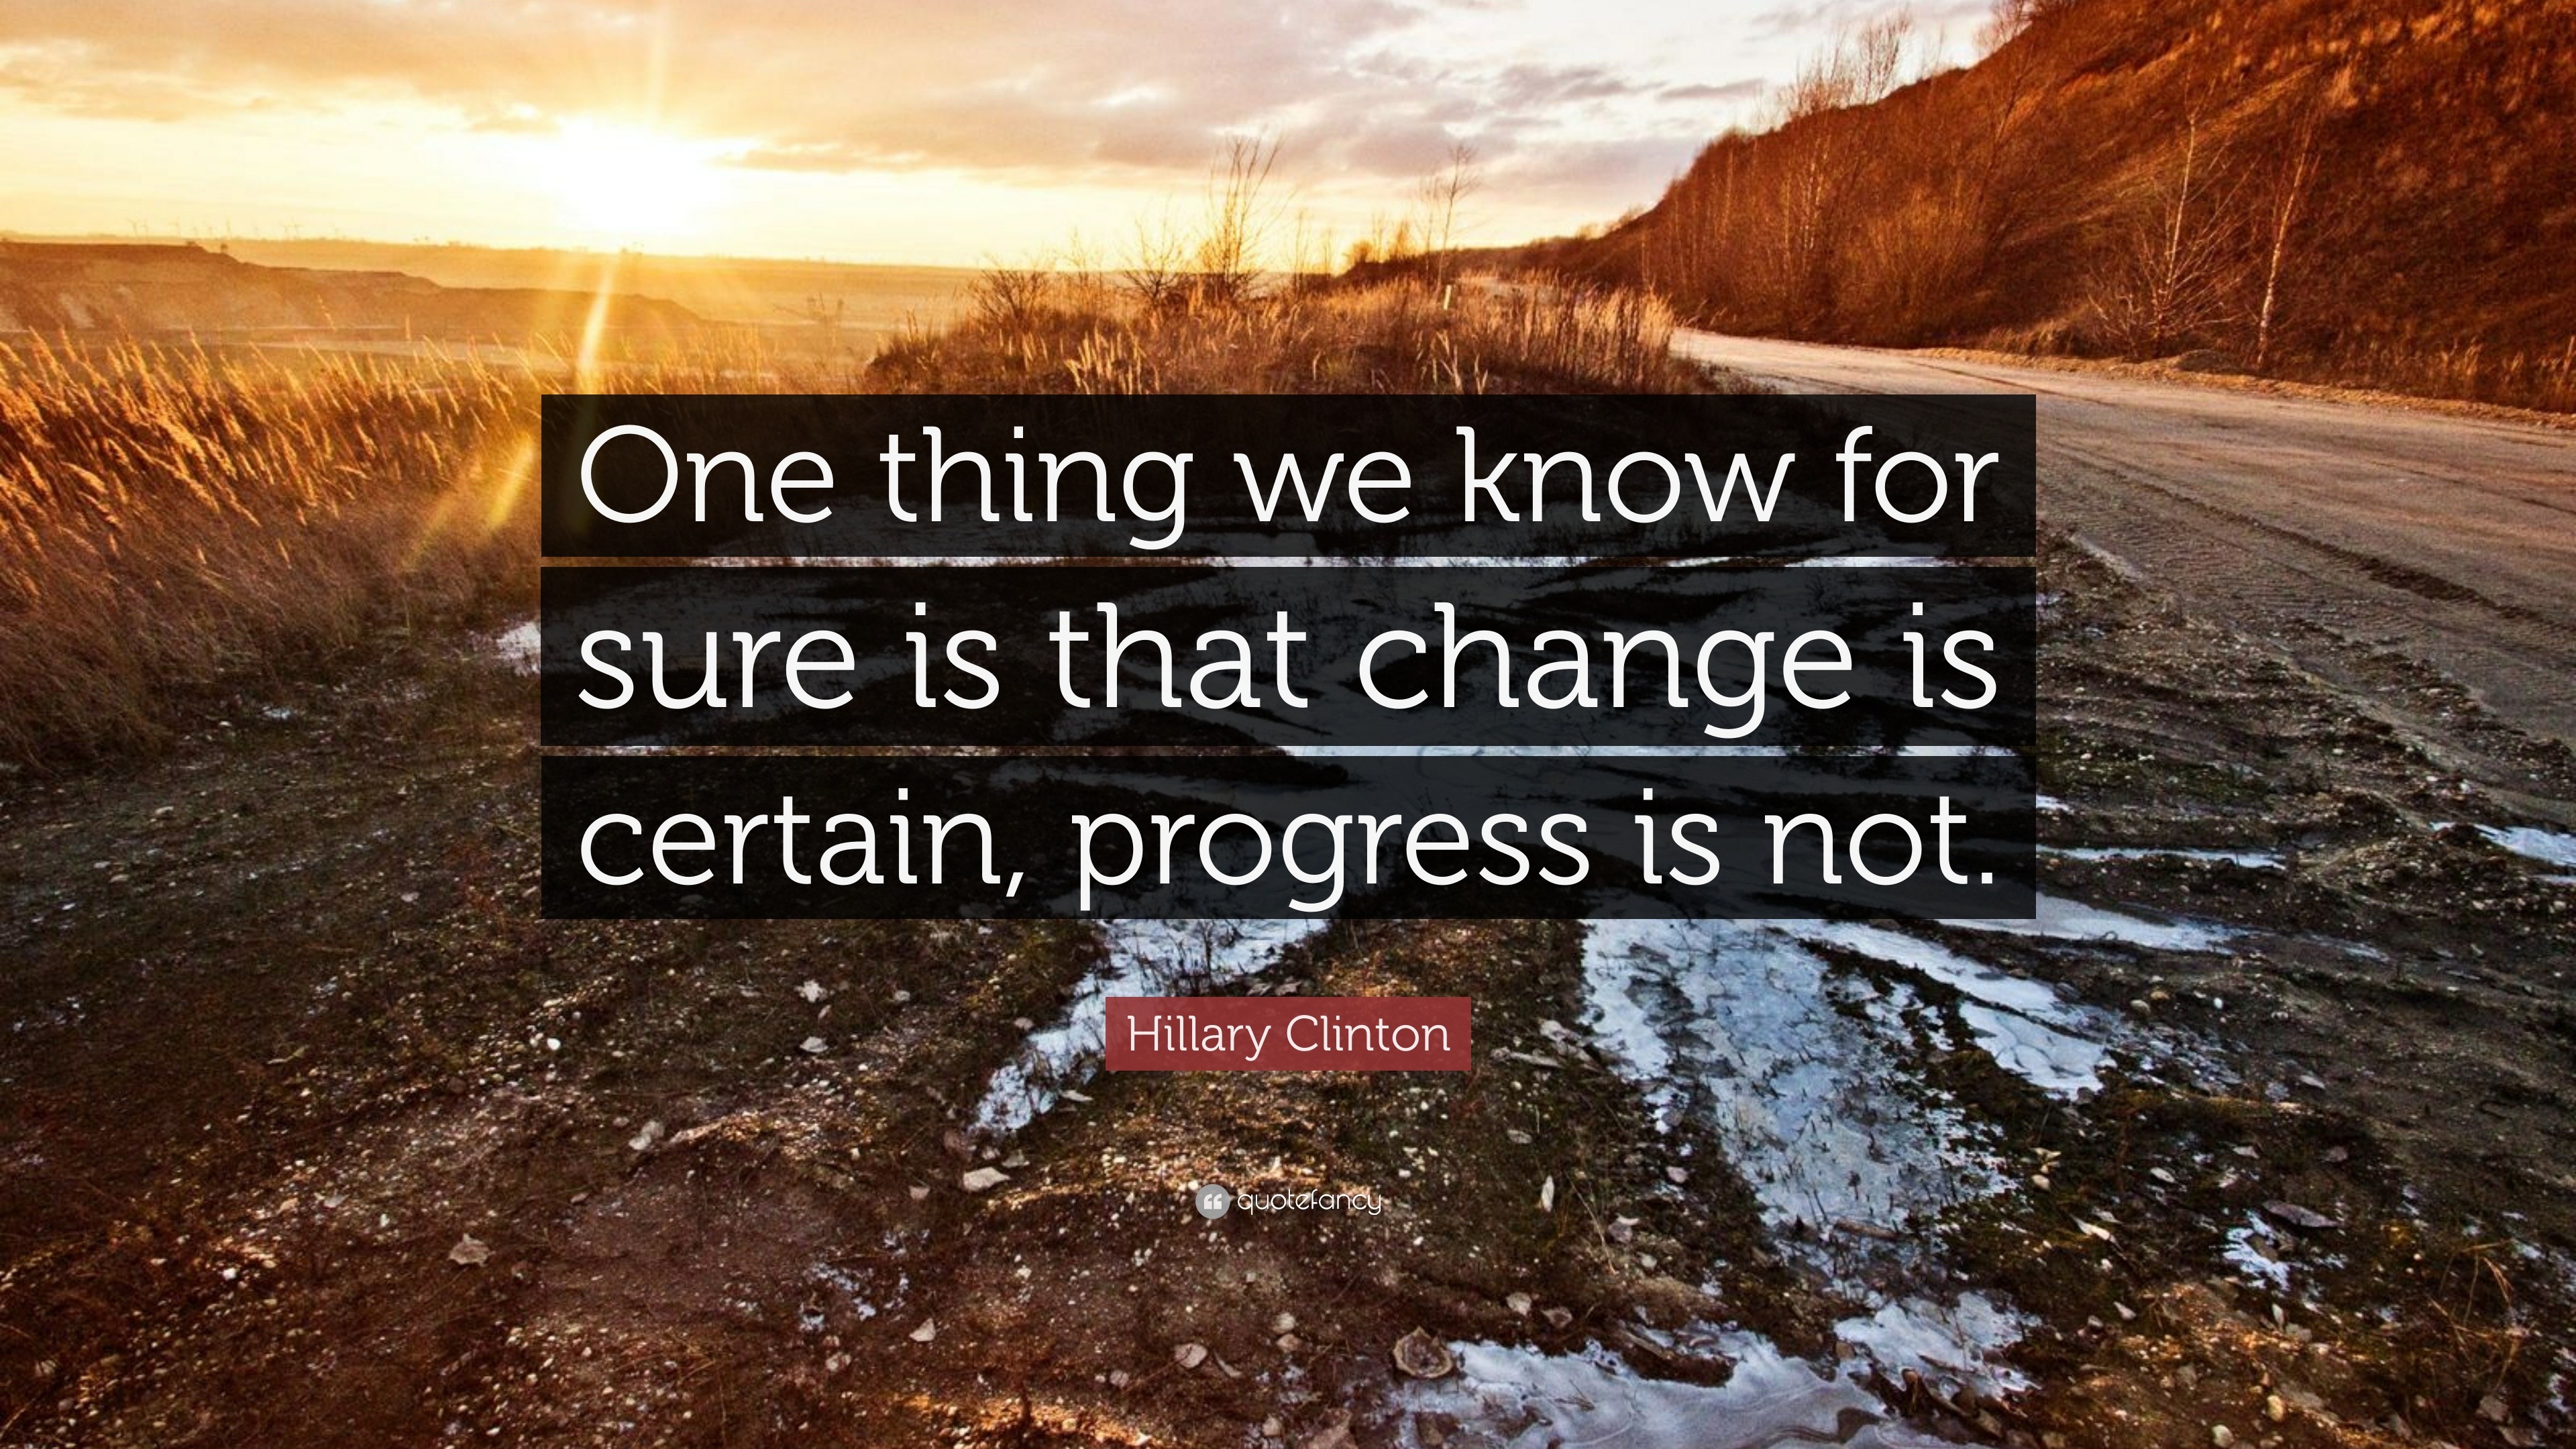 Hillary Clinton Quote: “One thing we know for sure is that change is ...